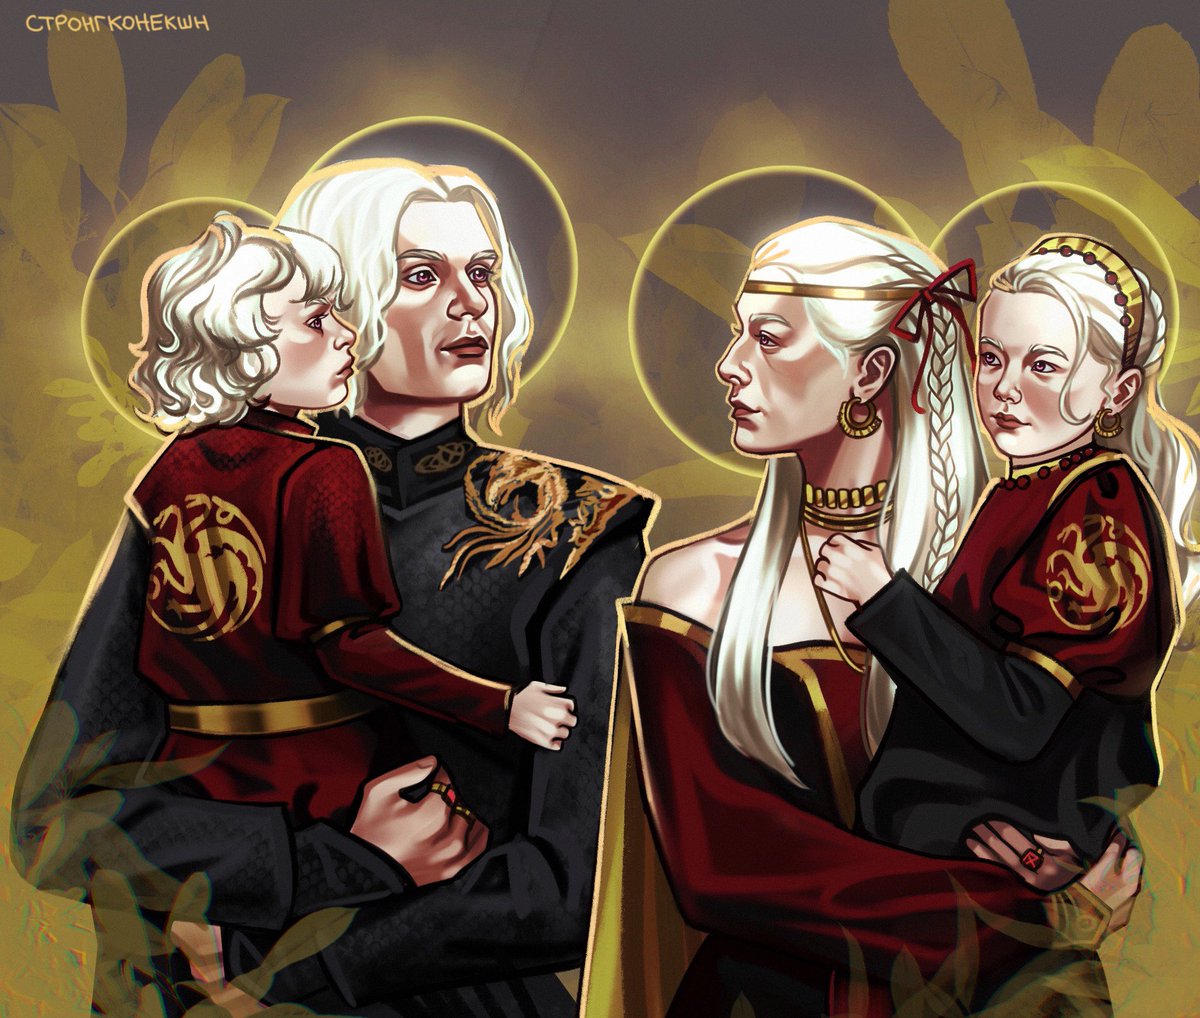 Imagine that instead of the dance of dragons Aegon and Rhaenyra get married and live a happy life with their babies Visenya and Daeron. 
Visenya kicked Daeron mercilessly and he's angry

#HouseOfTheDragon #RhaenyraTargaryen
#AegonTargaryen #Rhaegon